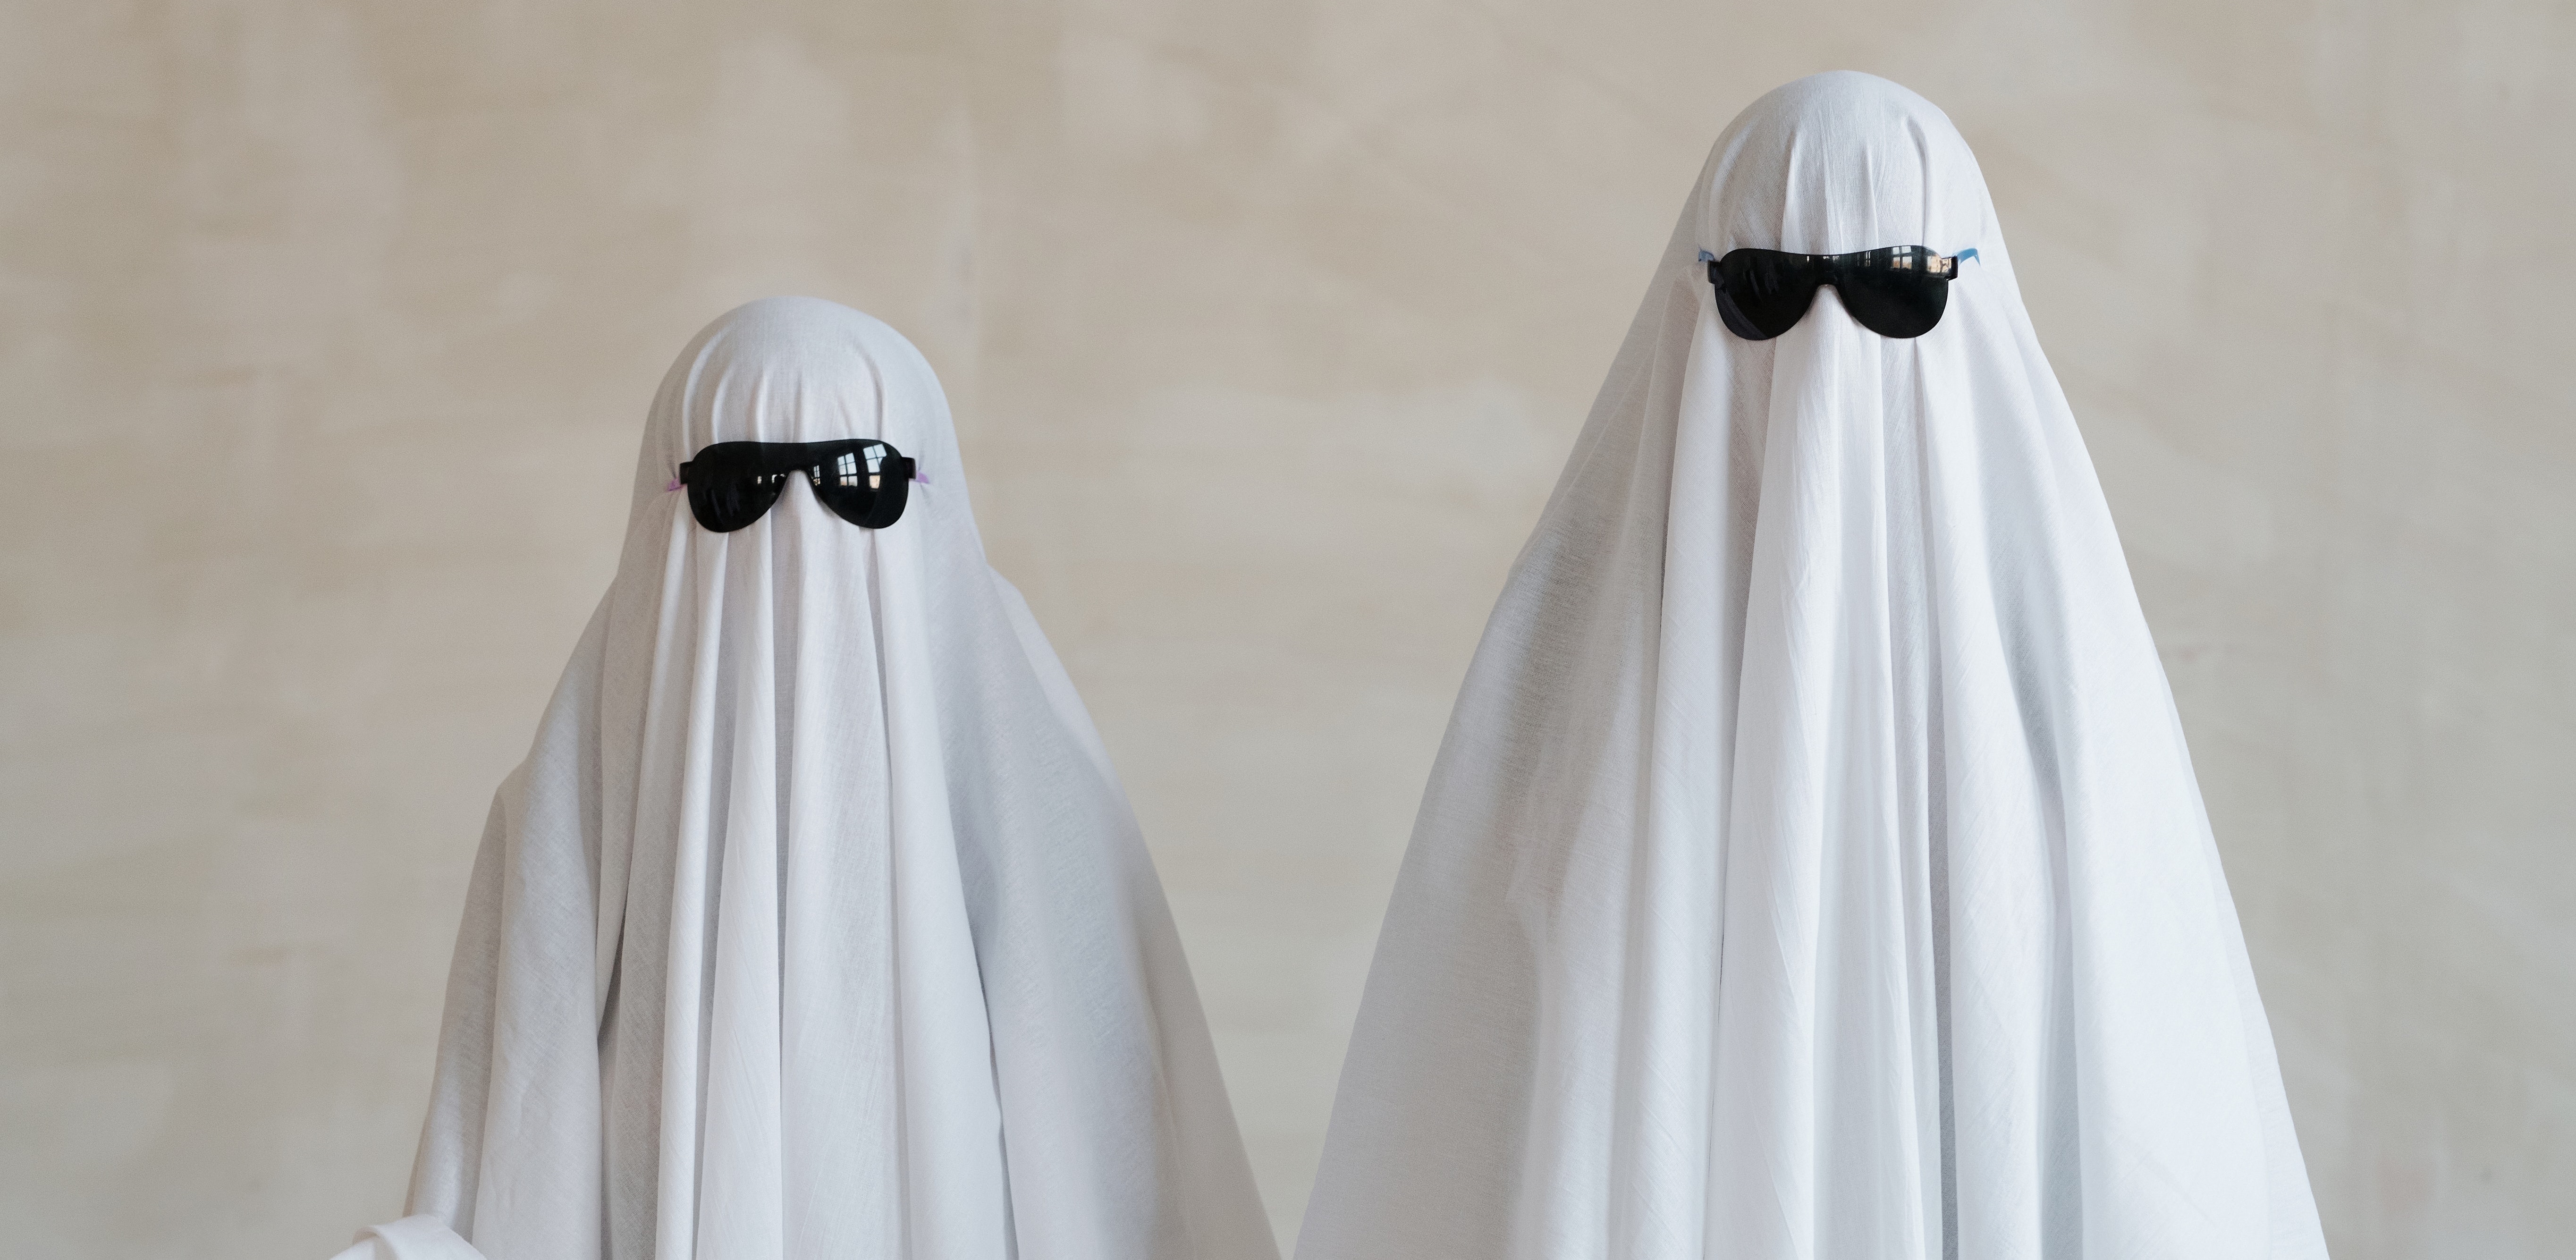 Halloween Fun On A Budget: 12 Costume Ideas Using Common Items In Your Home 